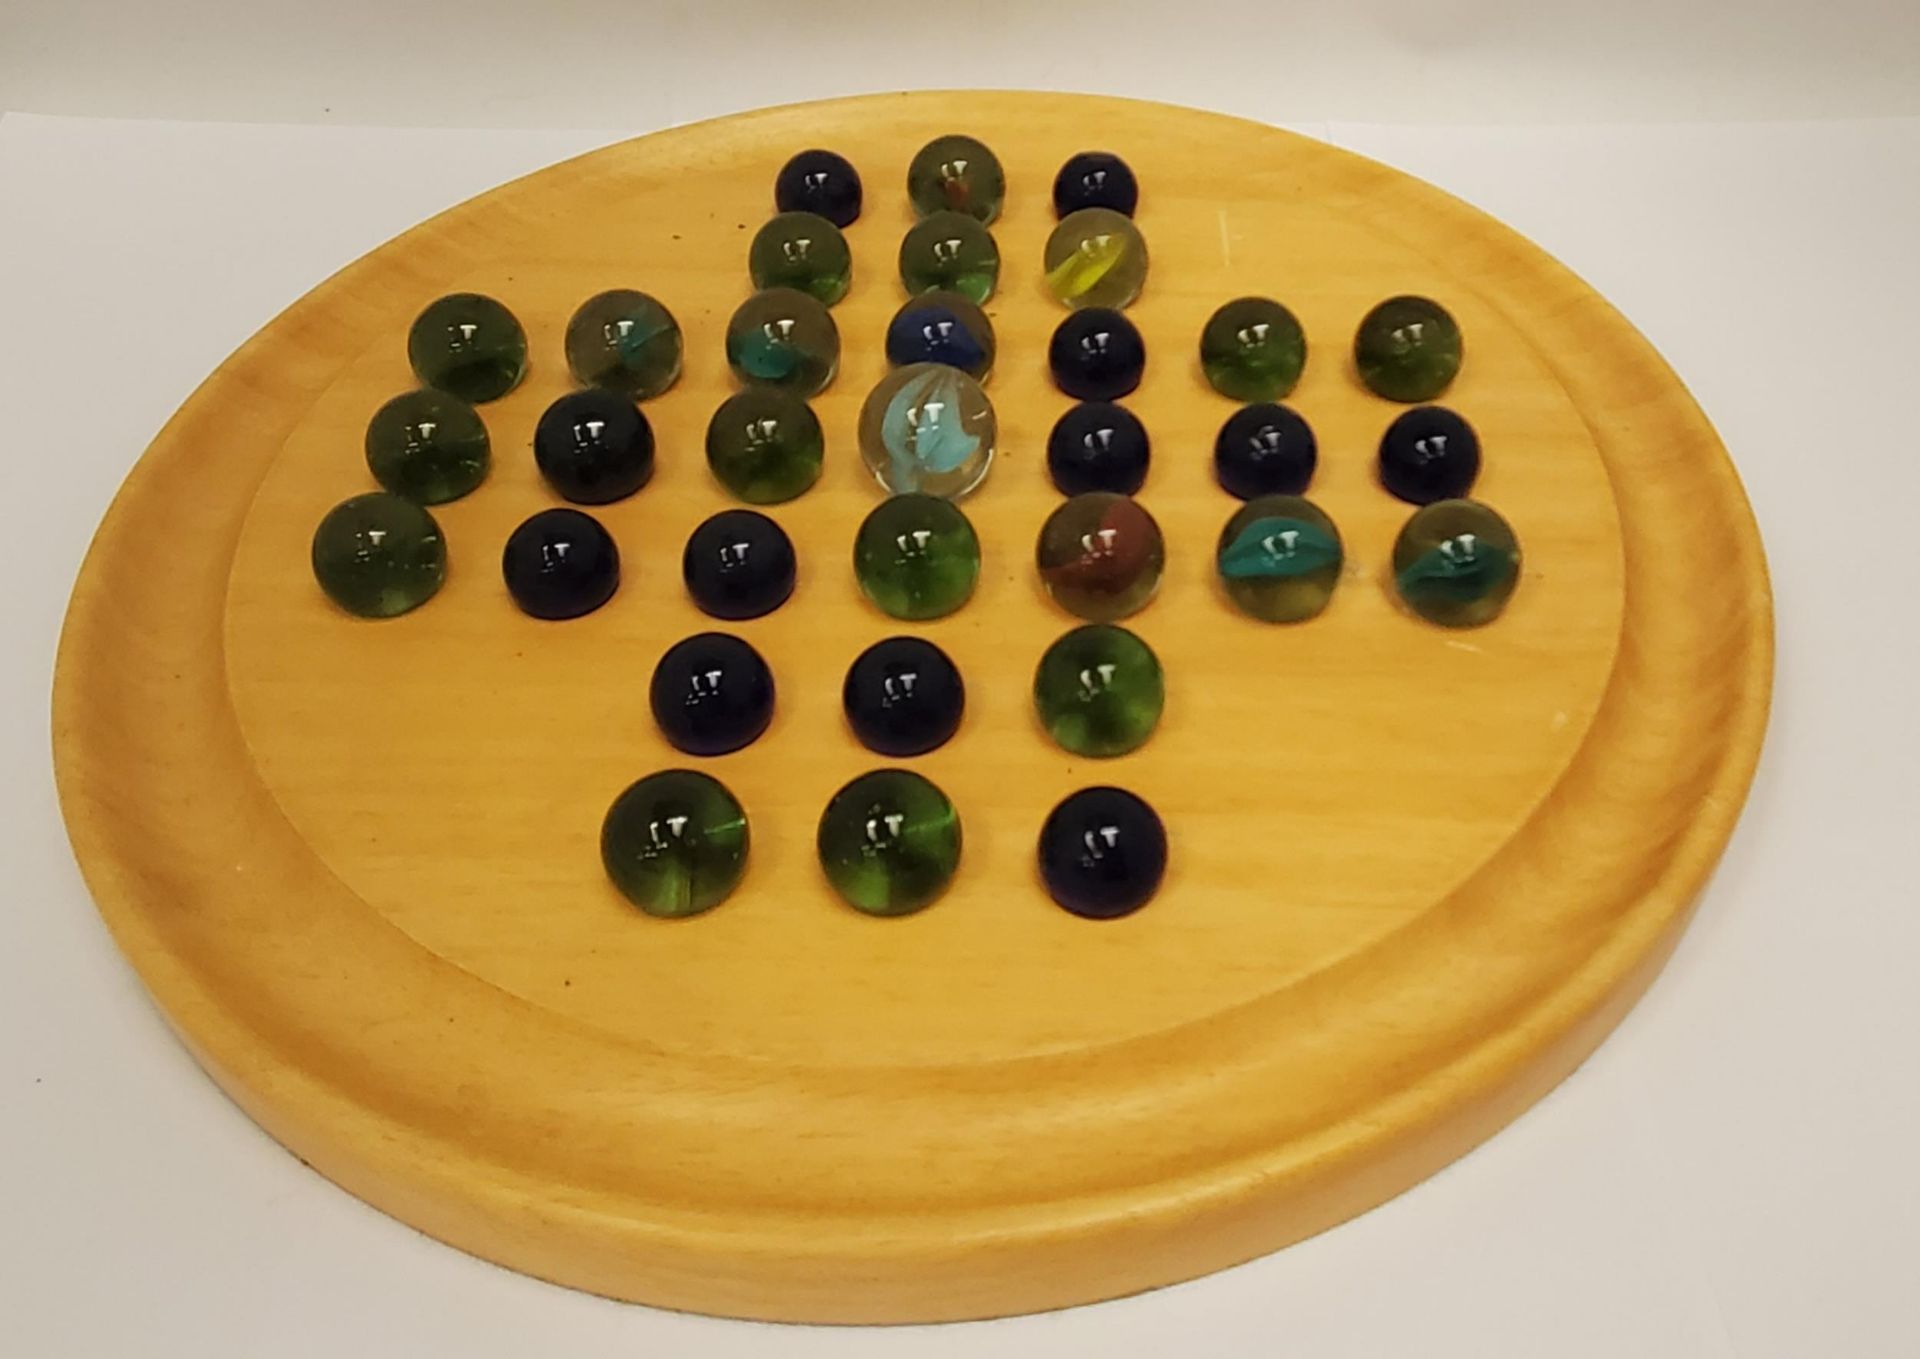 A LARGE WOODEN SOLITAIRE WITH VINTAGE MARBLES